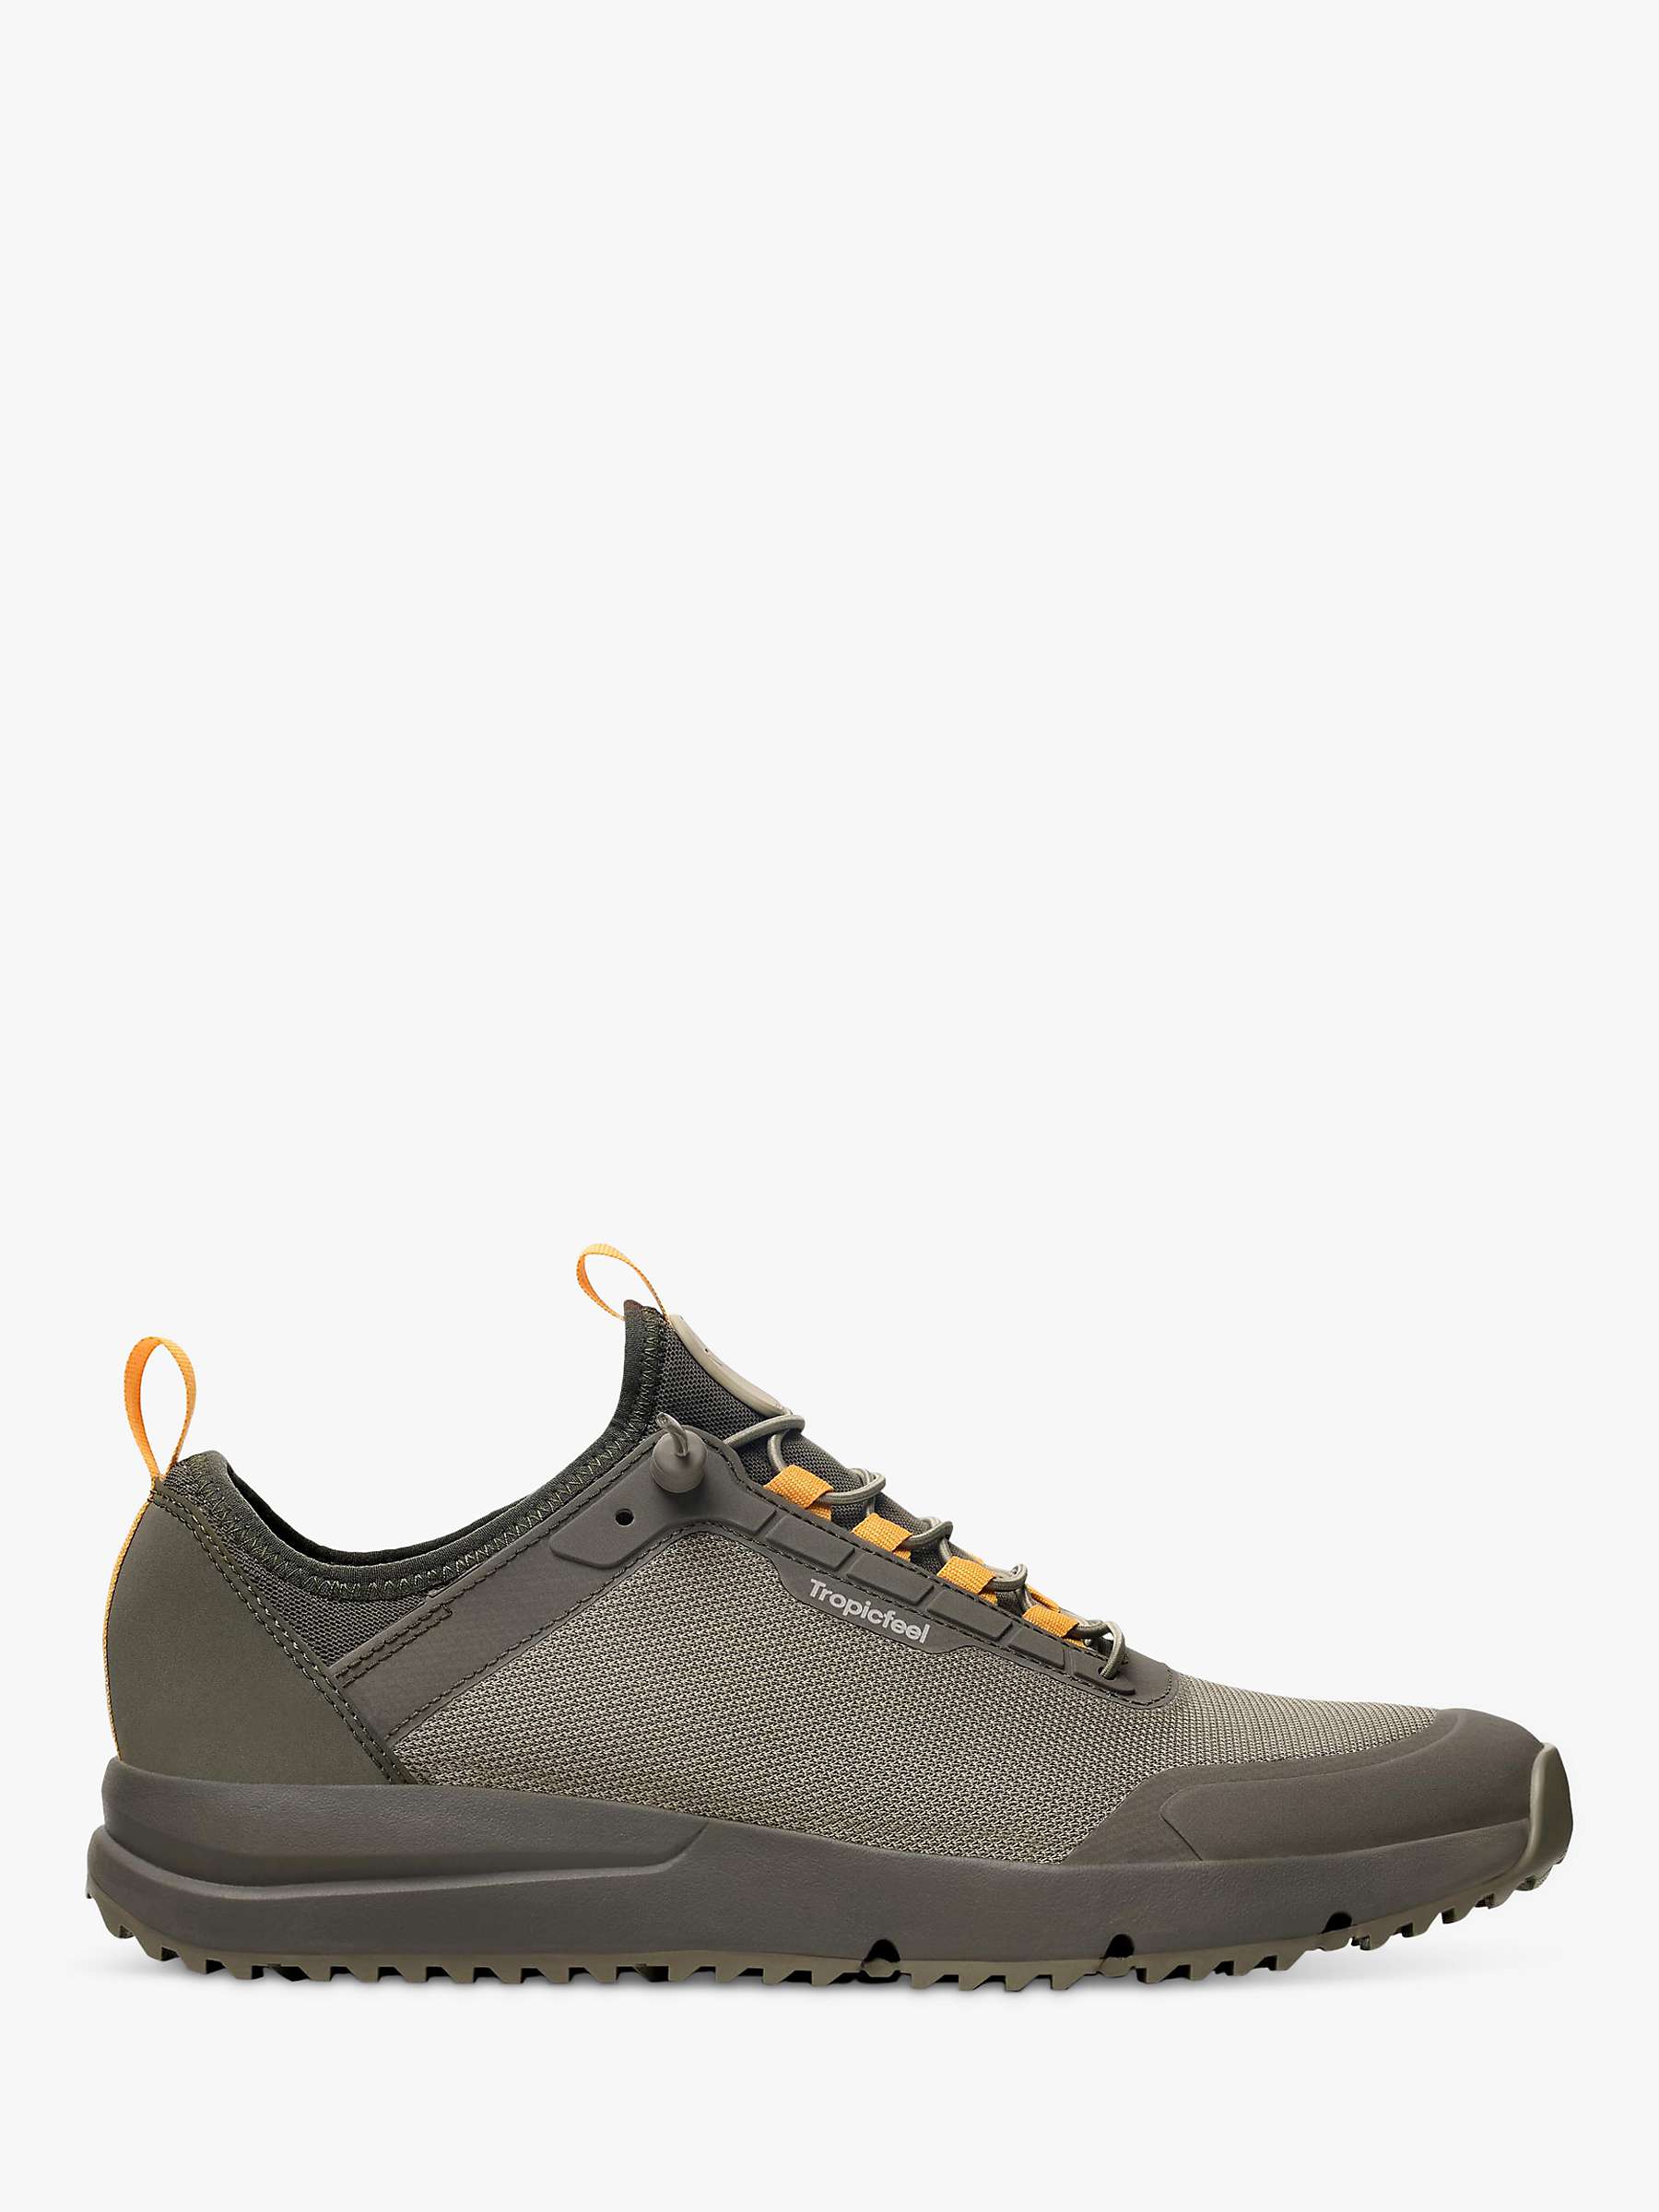 Buy Tropicfeel All-Terrain Recycled Trainers Online at johnlewis.com